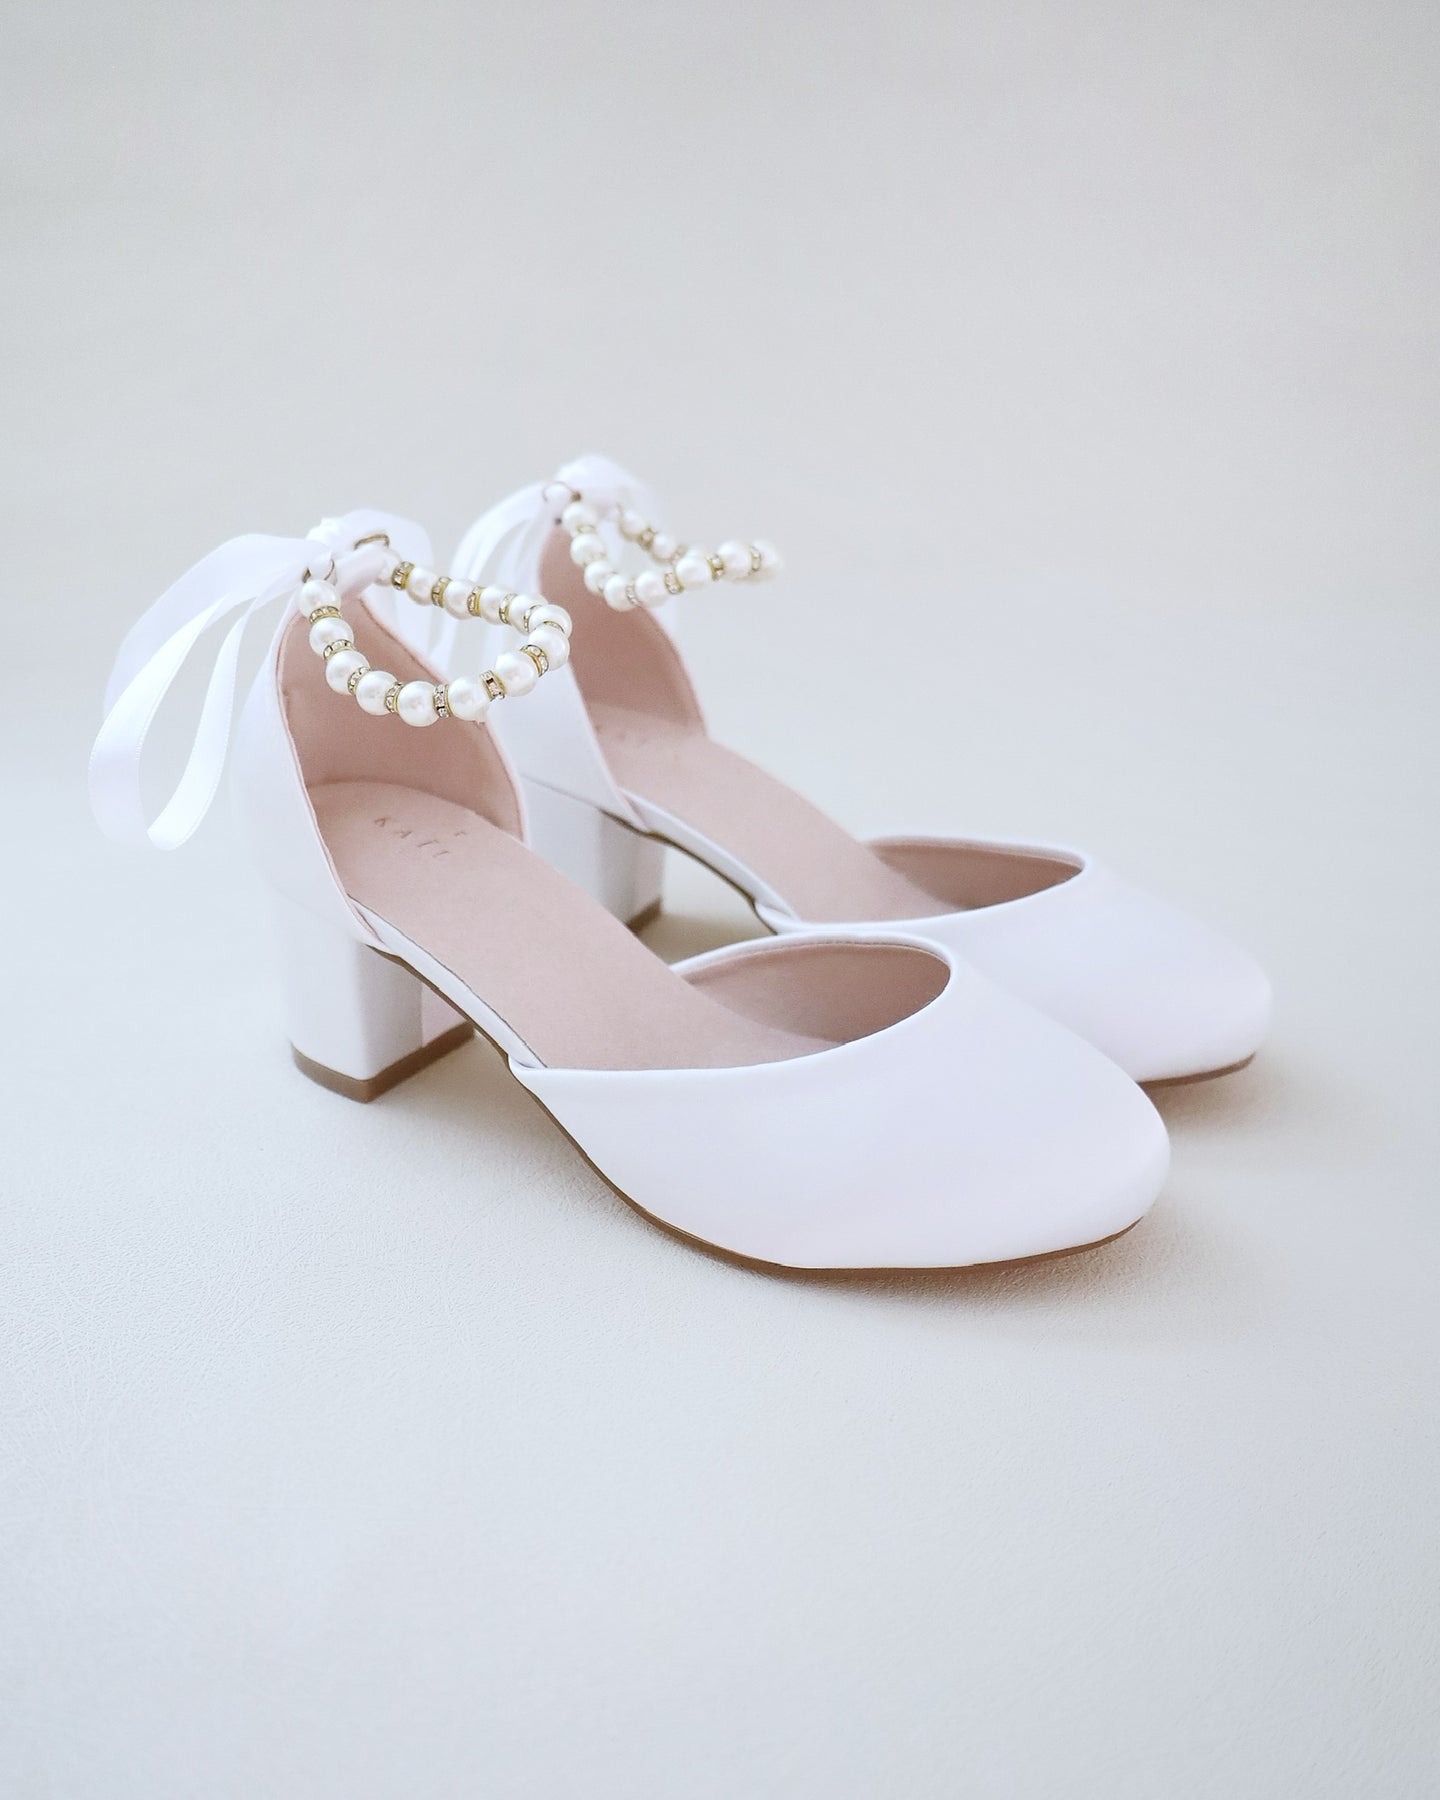 Kids White Shoes, Flower Girls Shoes, Baptism, Communion Shoes – Kailee ...